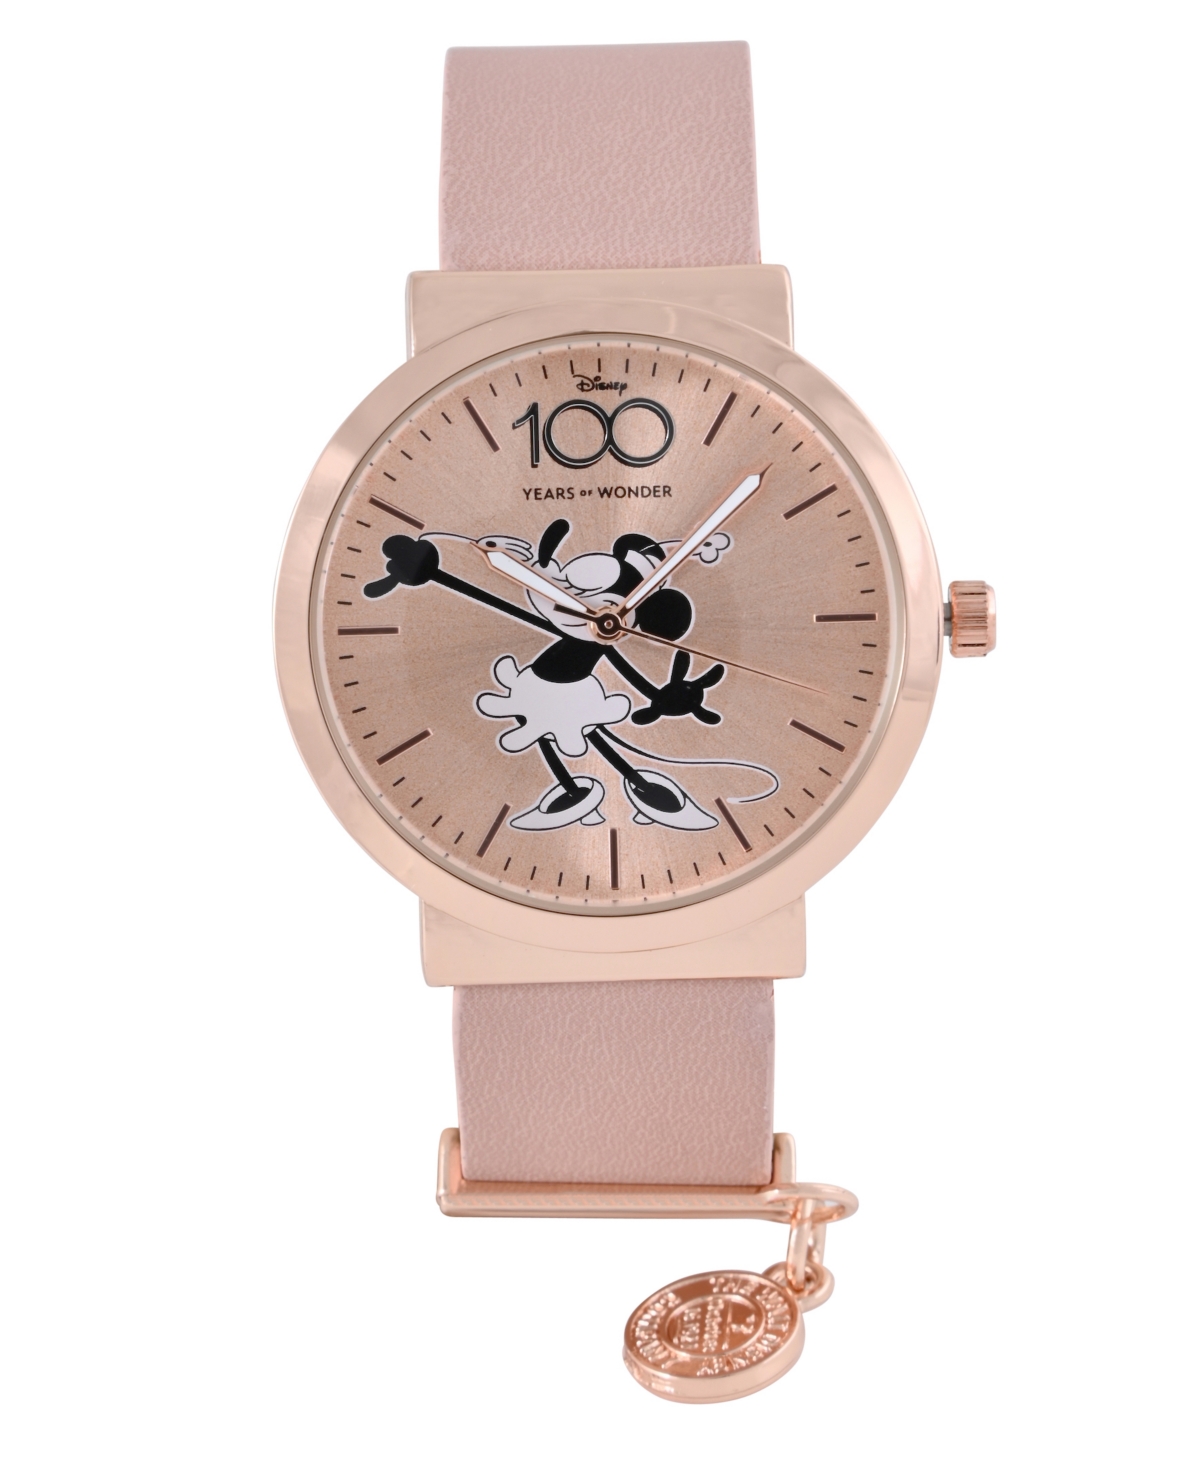 Accutime Women's Disney 100th Anniversary Analog Pink Faux Leather Watch 32mm